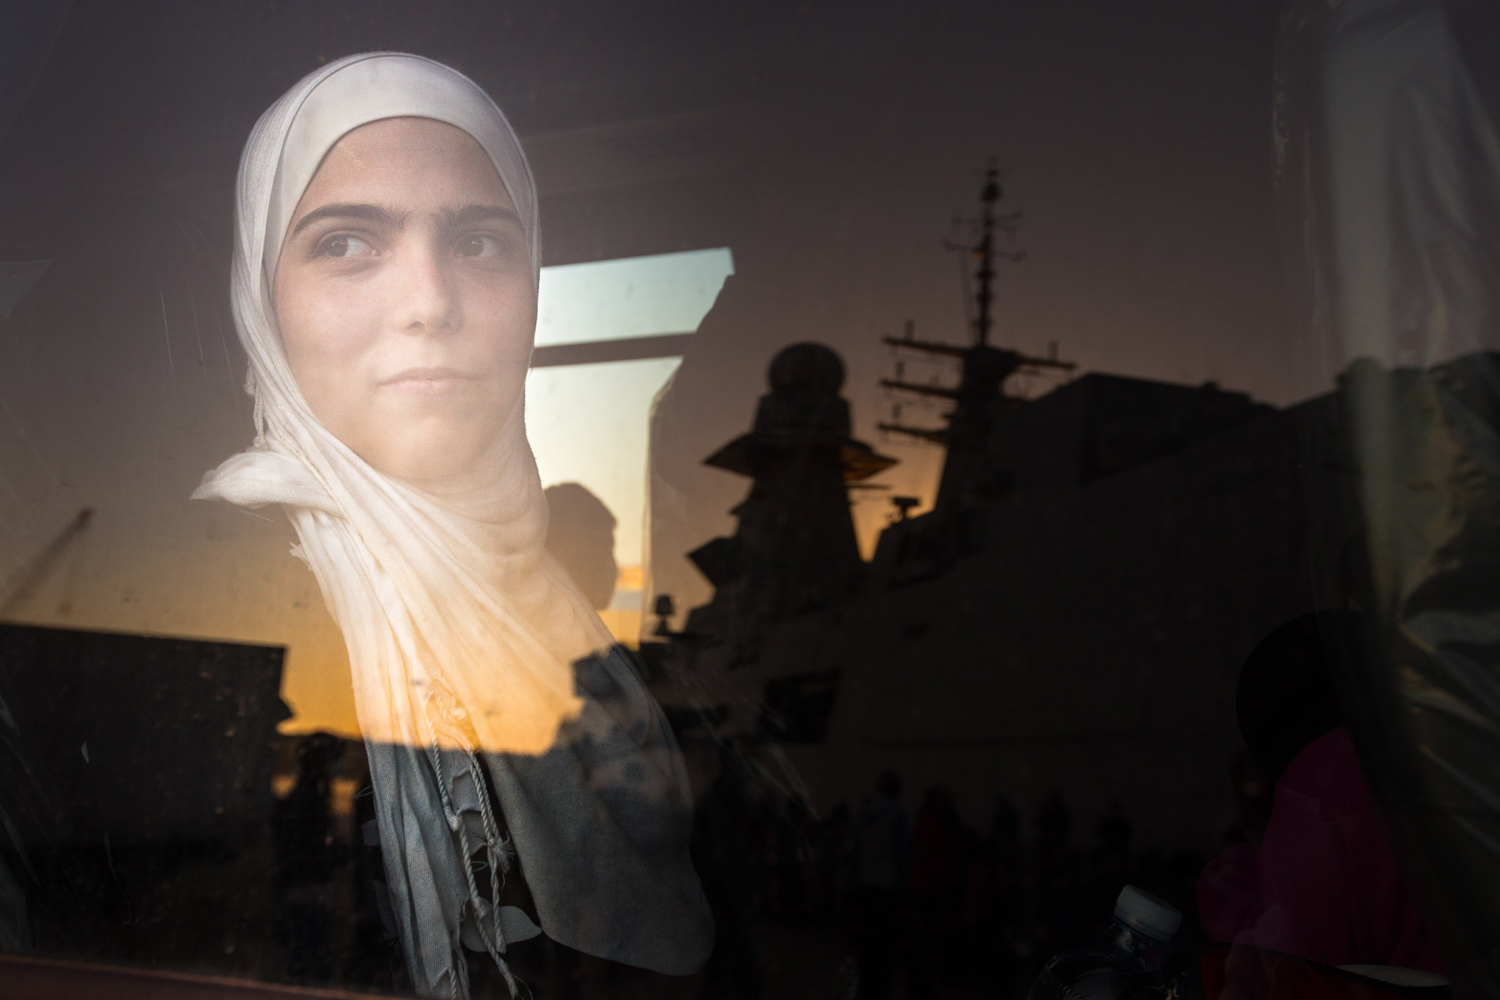 Syrian refugees on an Italian navy ship after being rescued from a fishing vessel carrying 443 Syrian asylum seekers, June 5, 2014. (Massimo Sestini—Polaris)